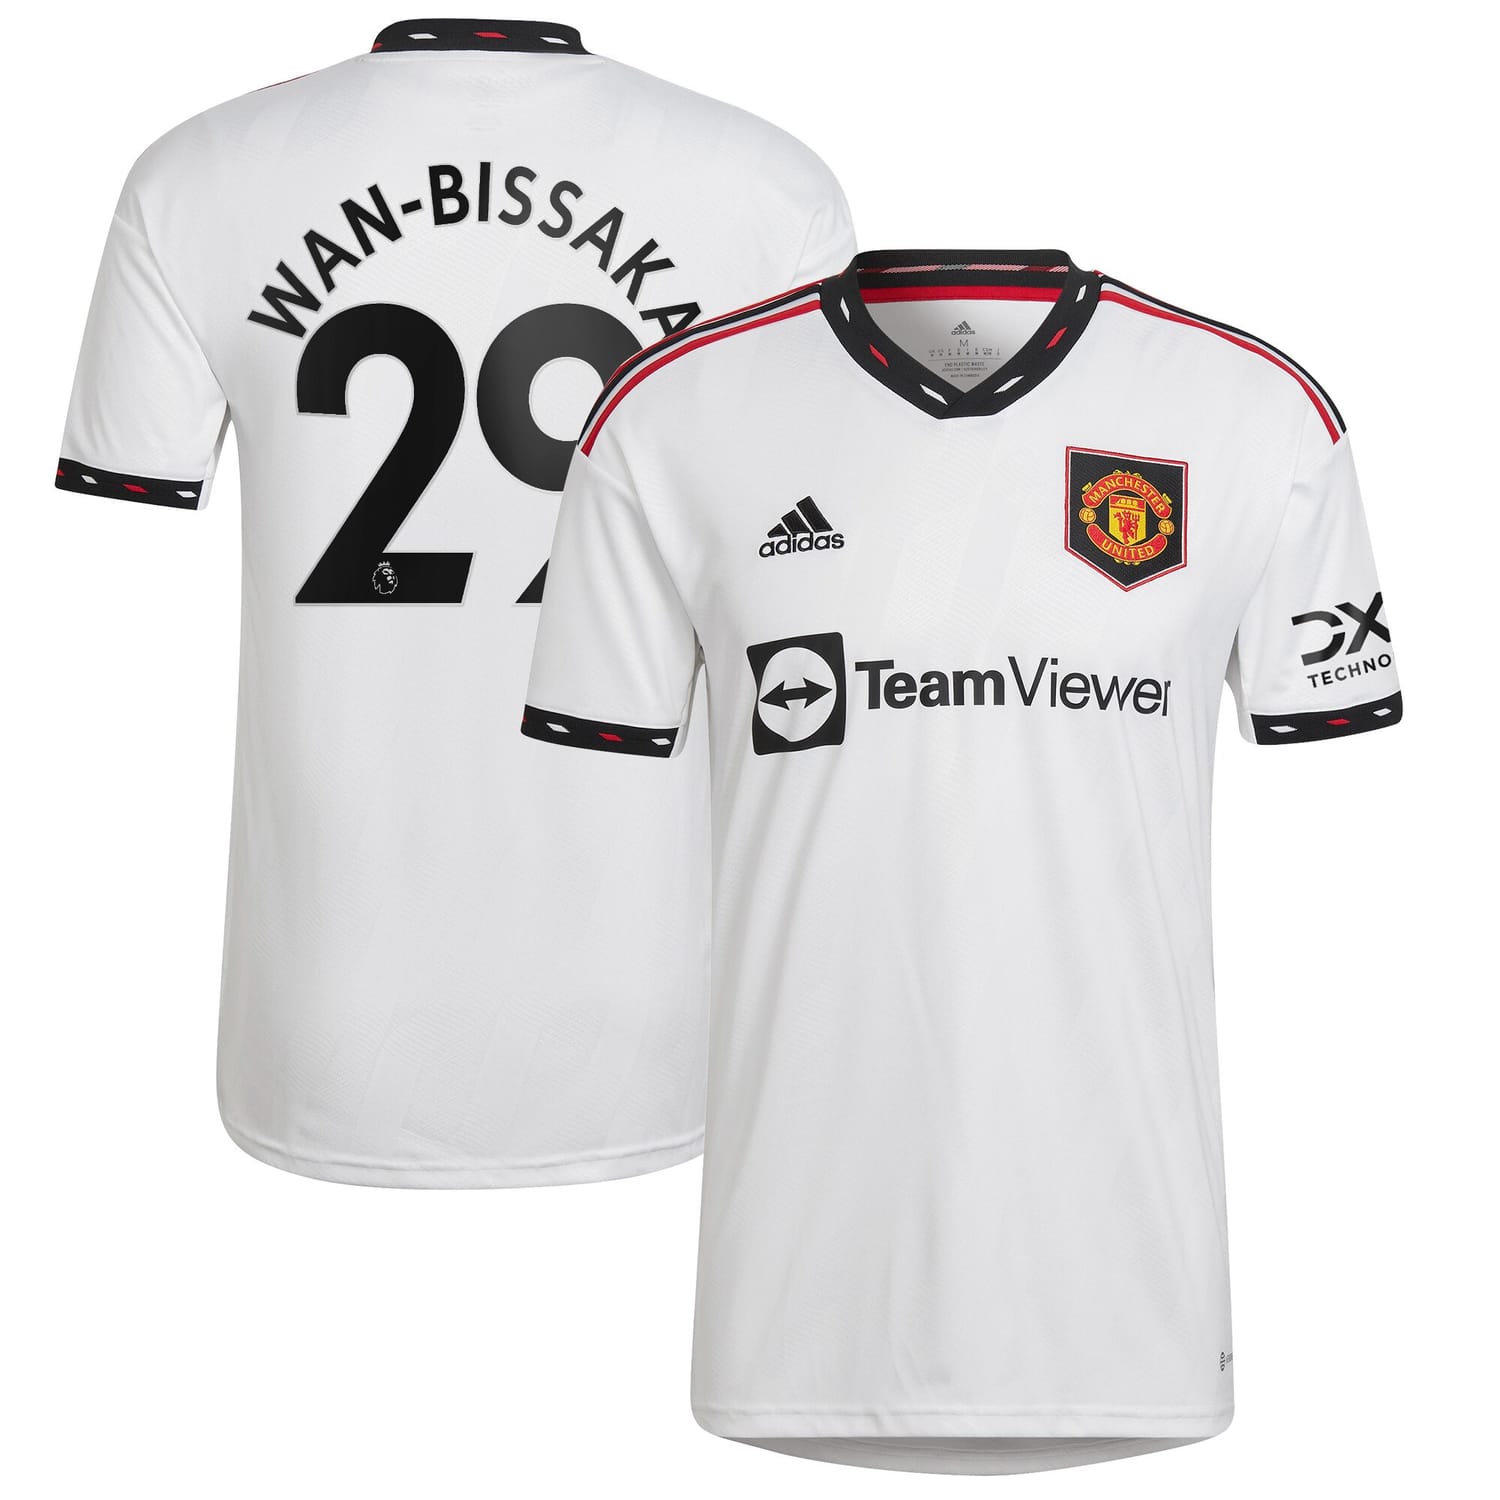 Premier League Manchester United Away Jersey Shirt White 2022-23 player Aaron Wan-Bissaka printing for Men